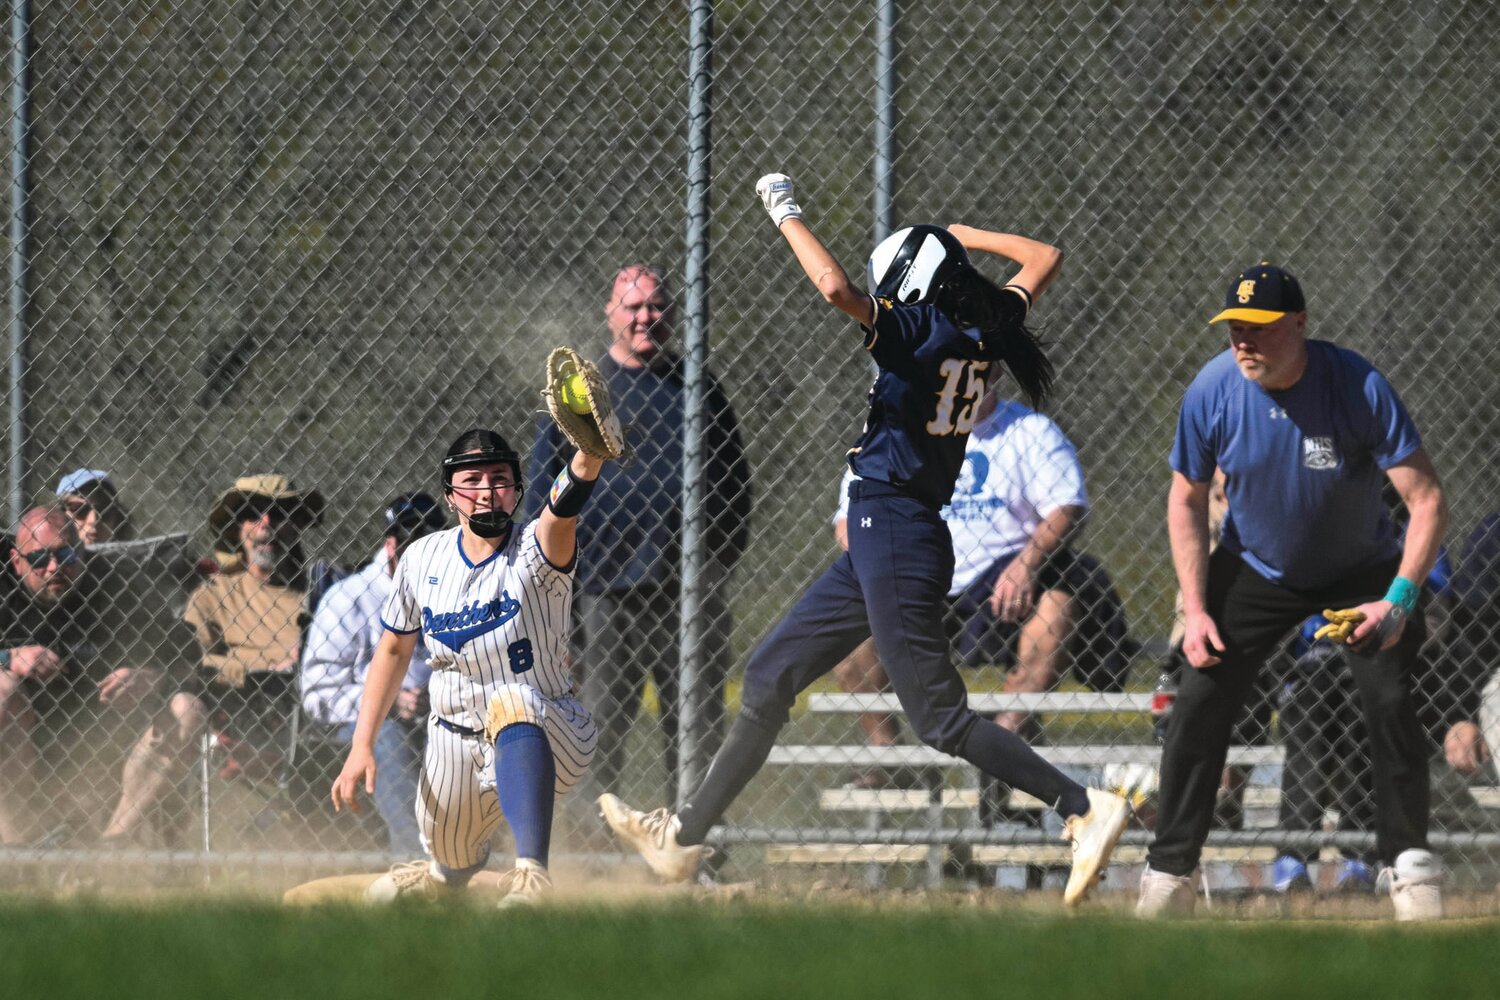 Quakertown’s Leah Schwalm fields a throw to just get New Hope-Solebury’s Izzy Elizondo in the third inning.